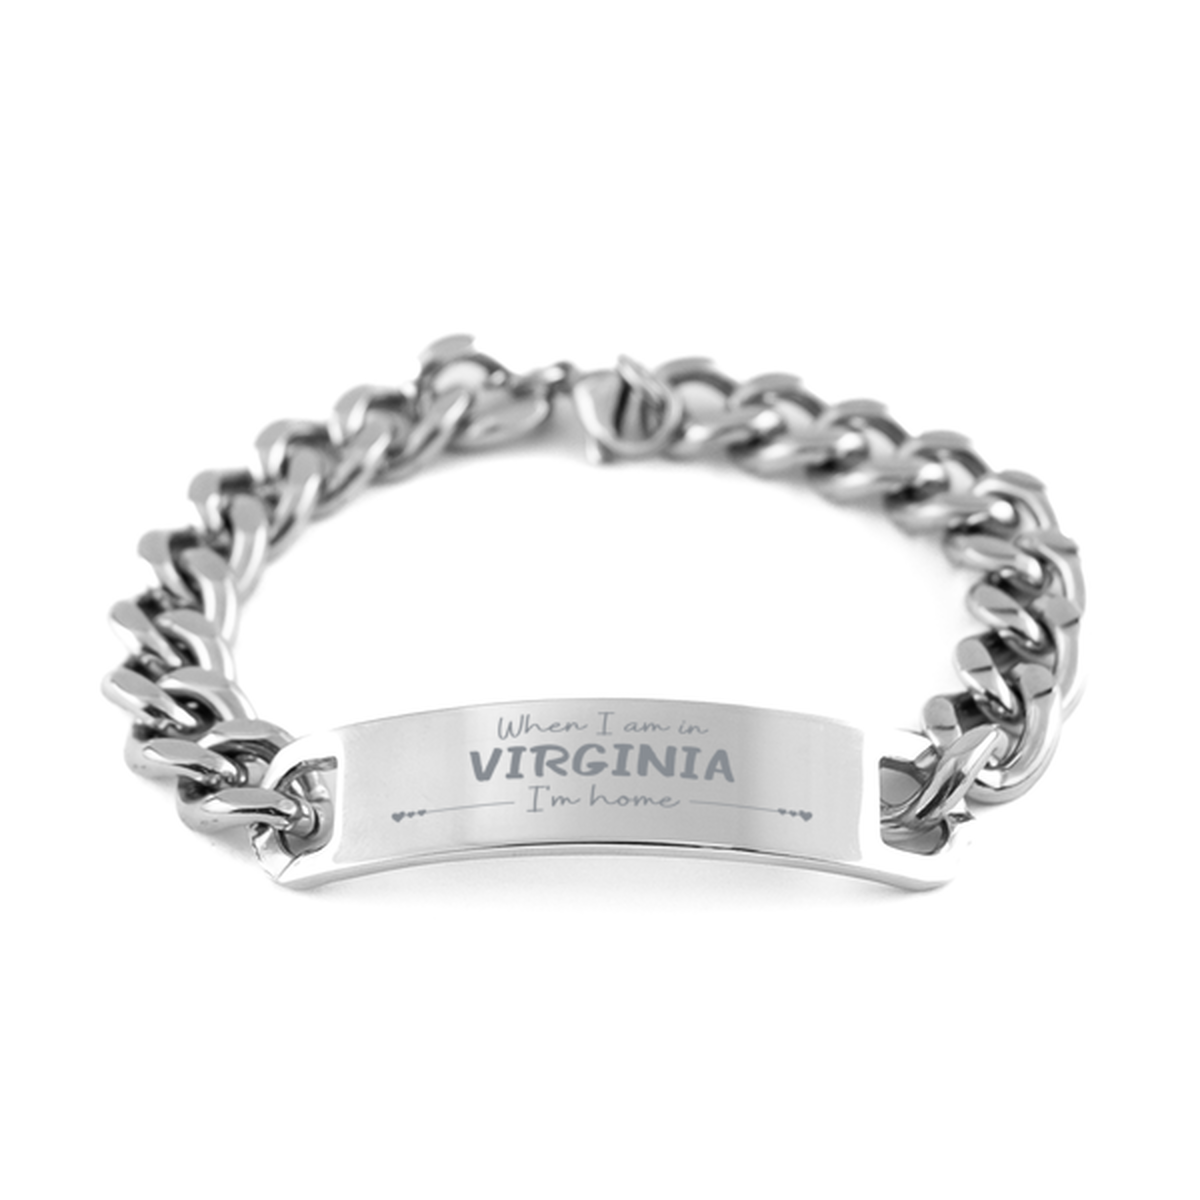 When I am in Virginia I'm home Cuban Chain Stainless Steel Bracelet, Cheap Gifts For Virginia, State Virginia Birthday Gifts for Friends Coworker